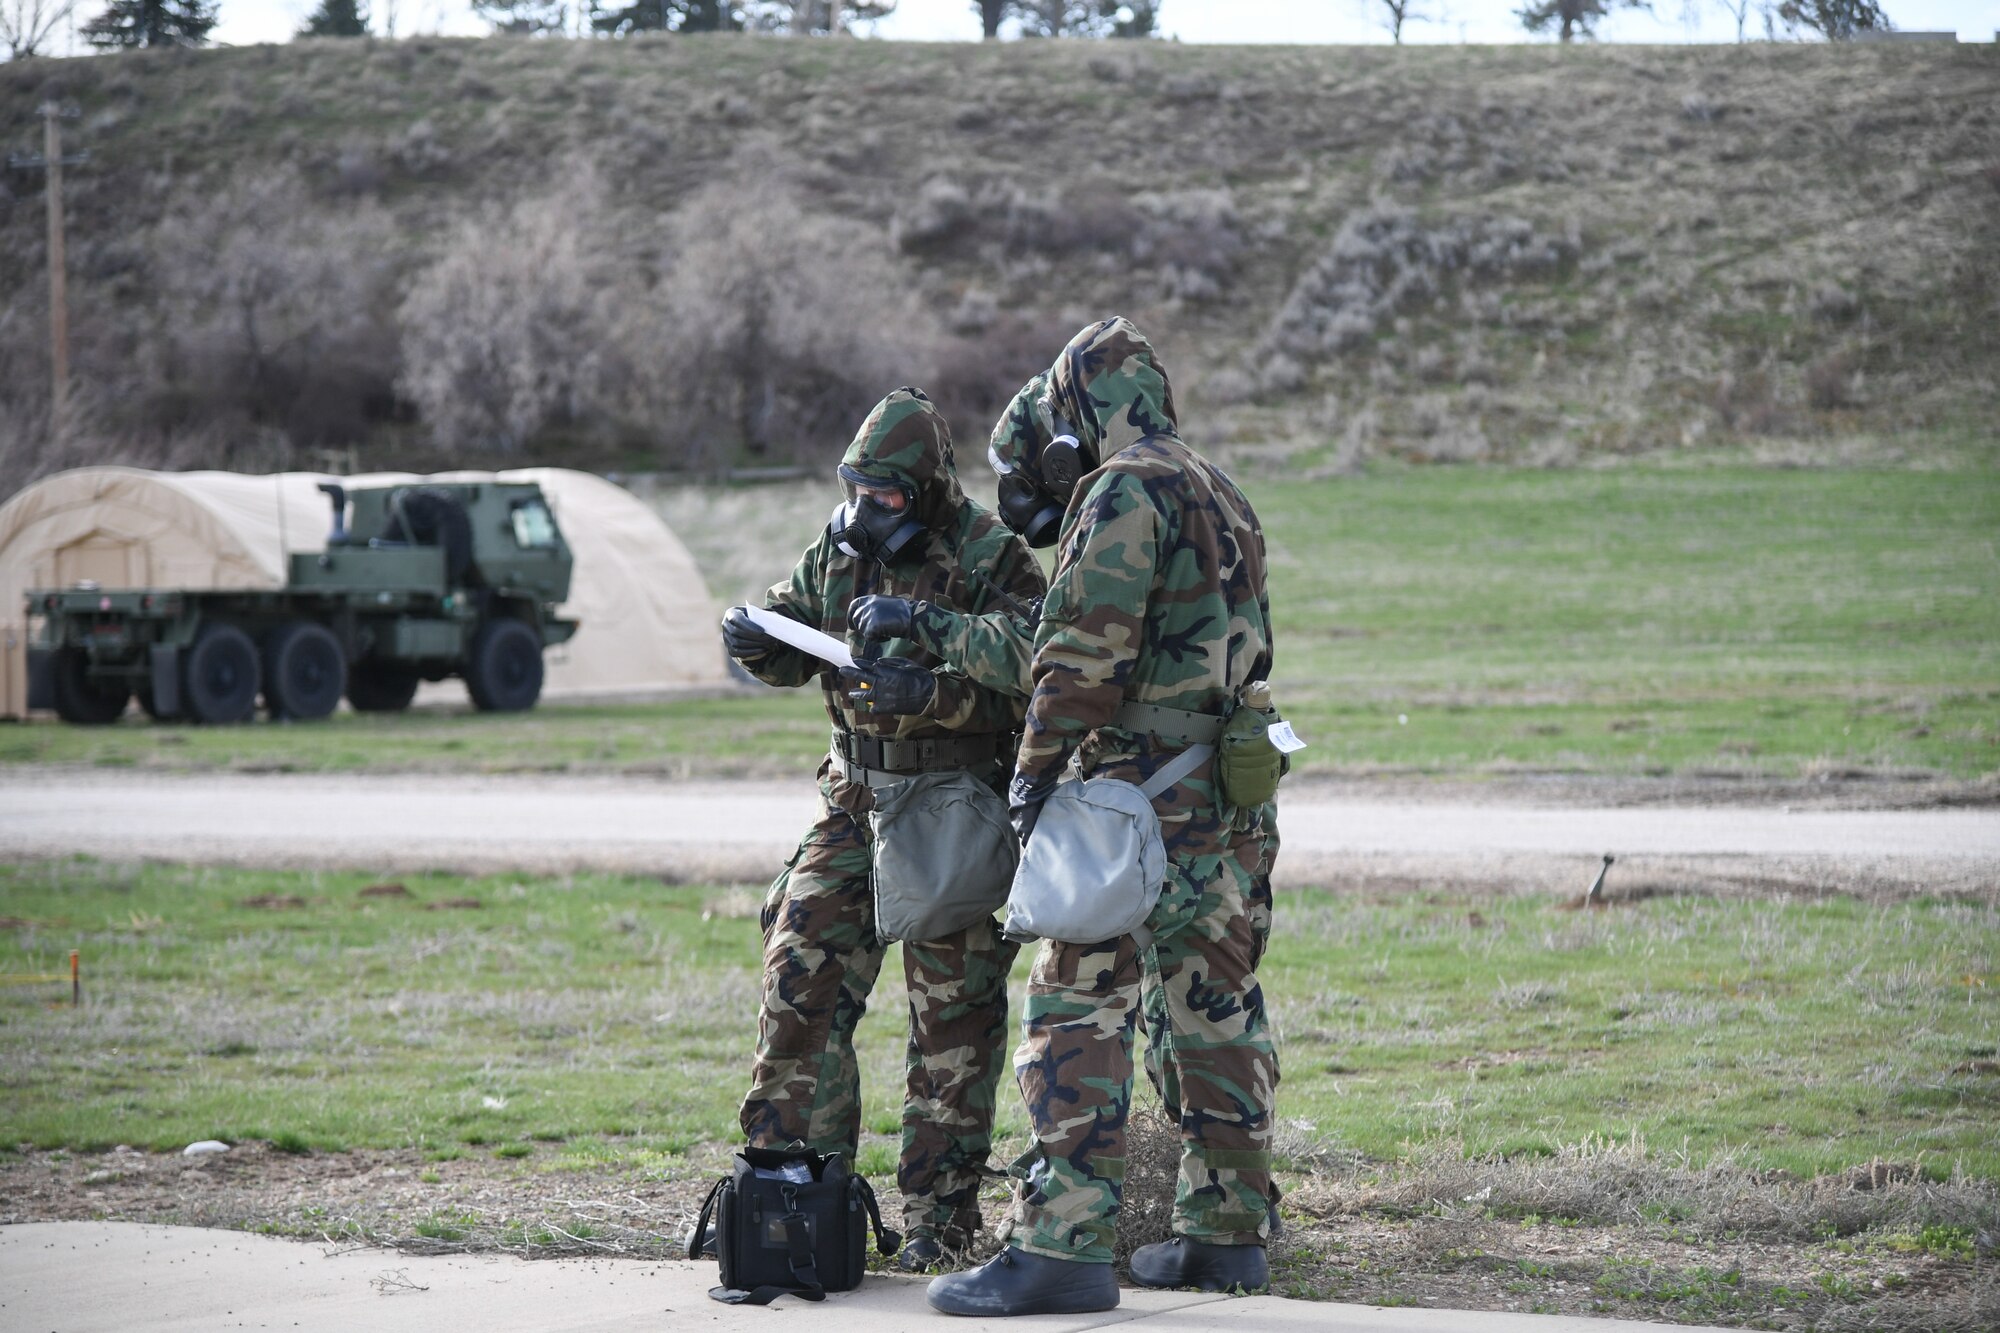 The post-reconnaissance team, part of the 419th Civil Engineer Squadron, looks for unexploded ordnance, casualties, and injured personnel during a mock deployment exercise